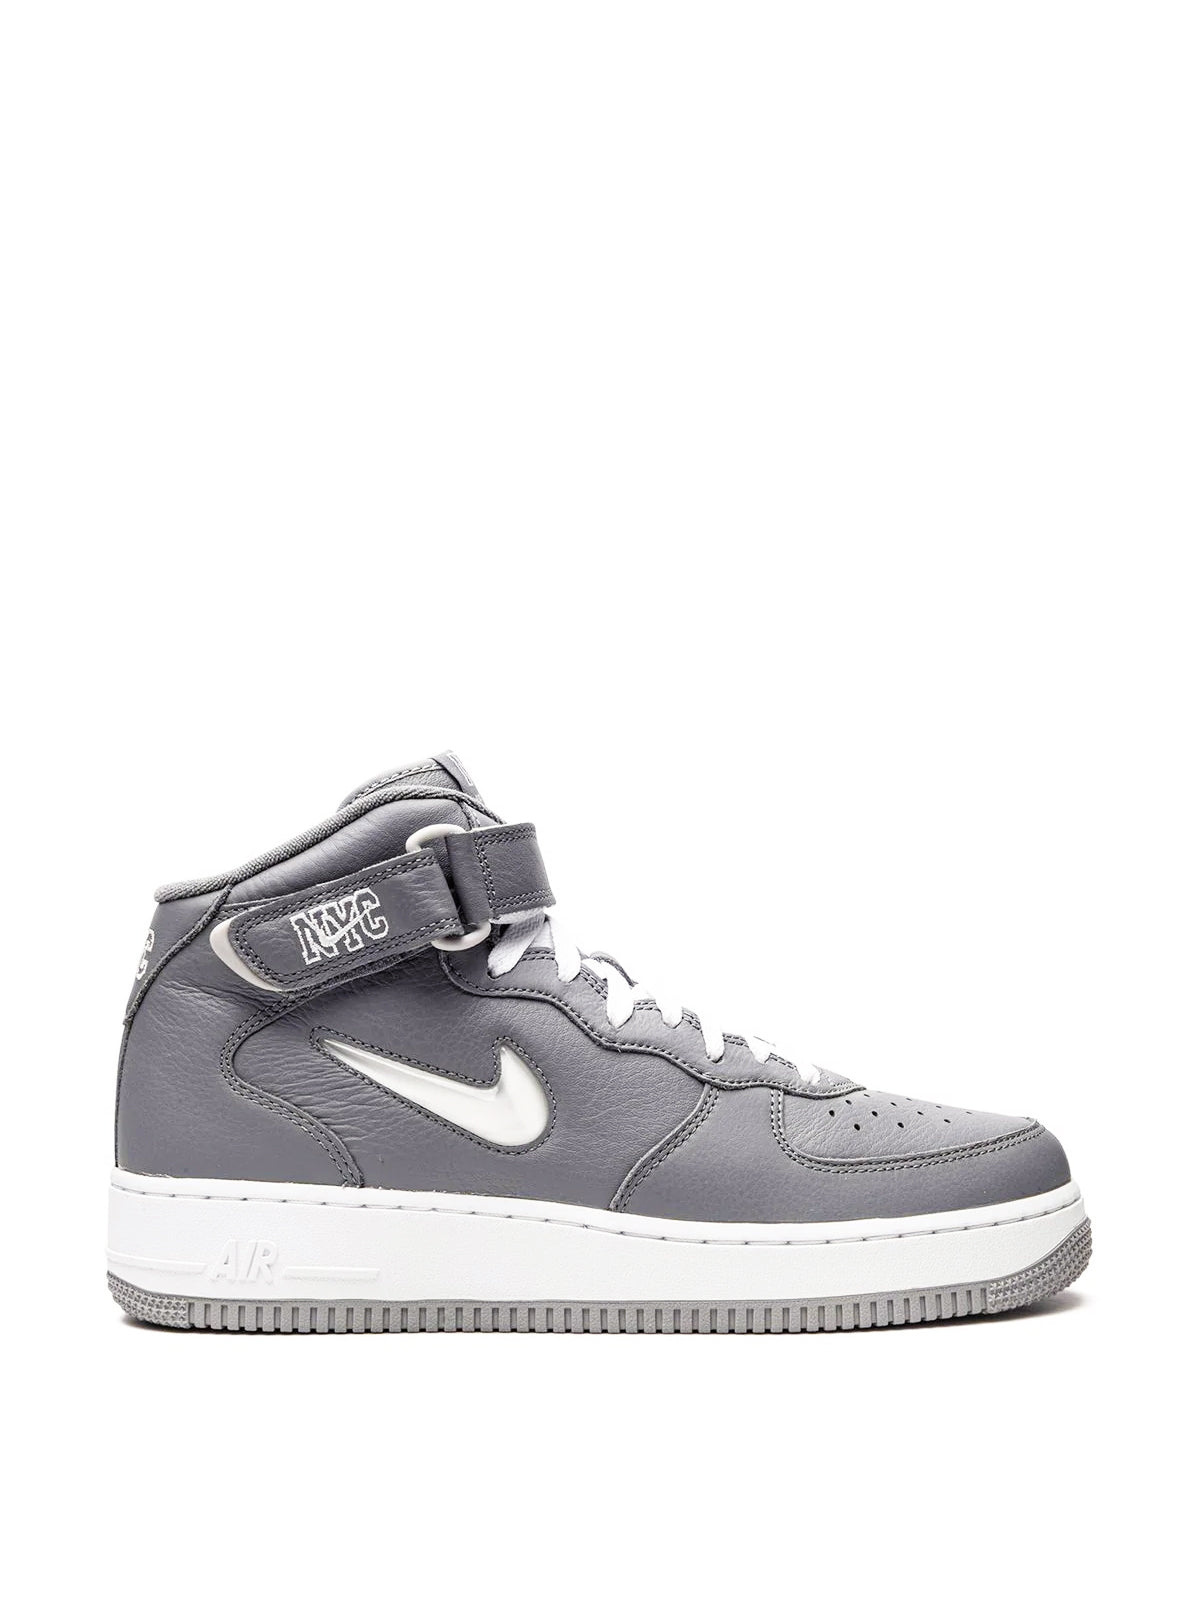 Nike-OUTLET-SALE-Air Force 1 Mid QS Jewel NYC Sneakers-ARCHIVIST